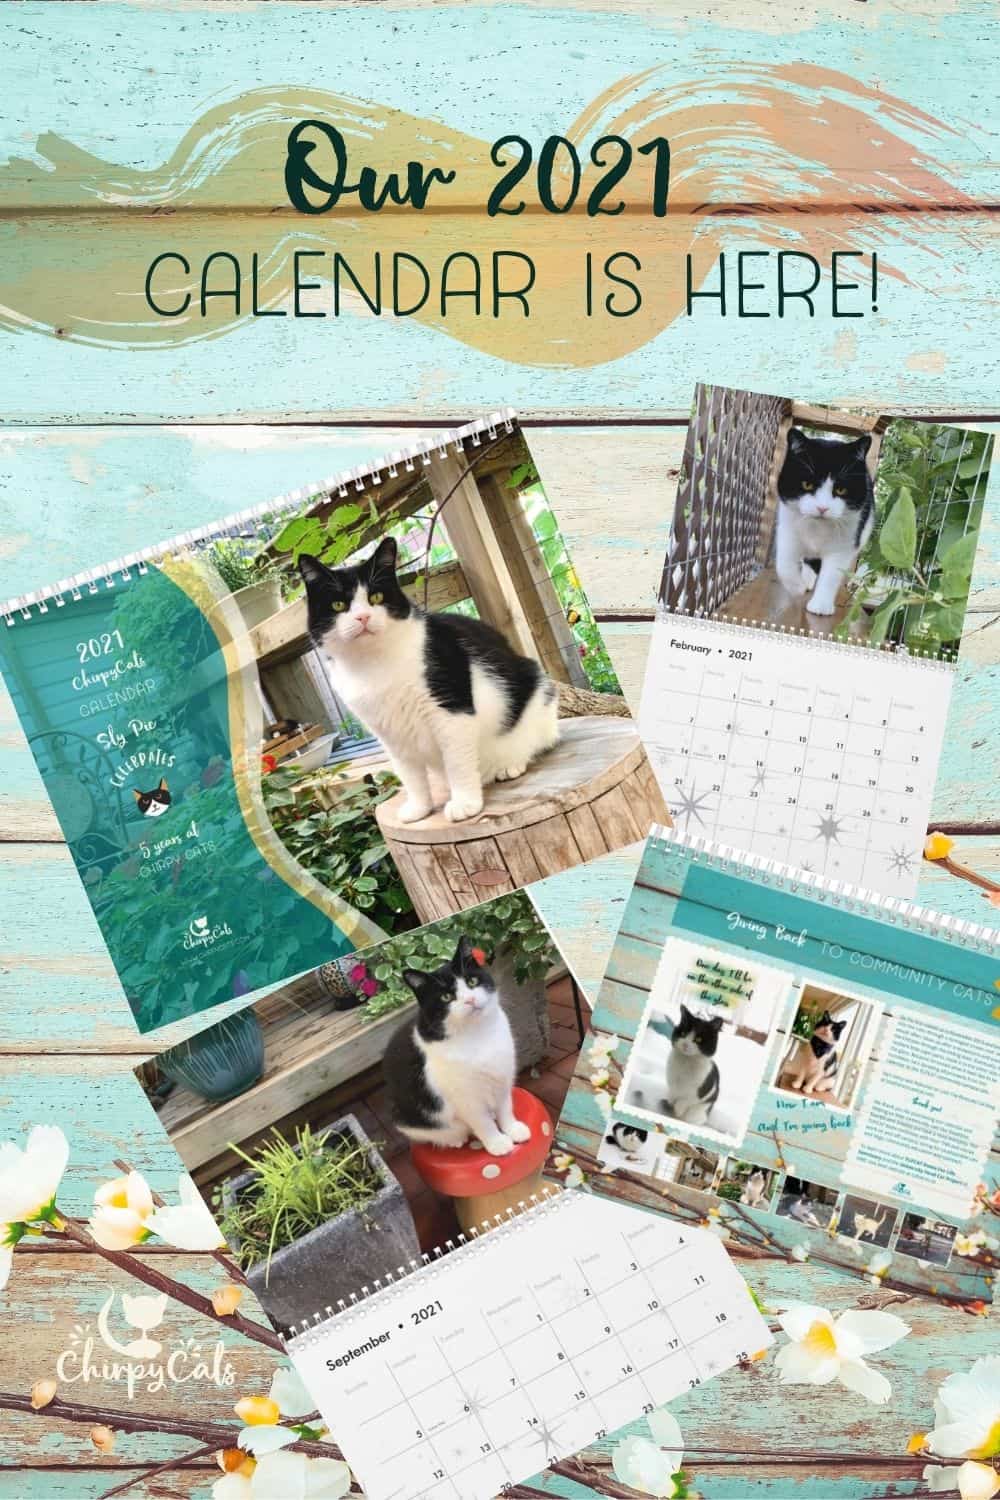 2021 Calendar features the Life of Sly Pie (and giving back)